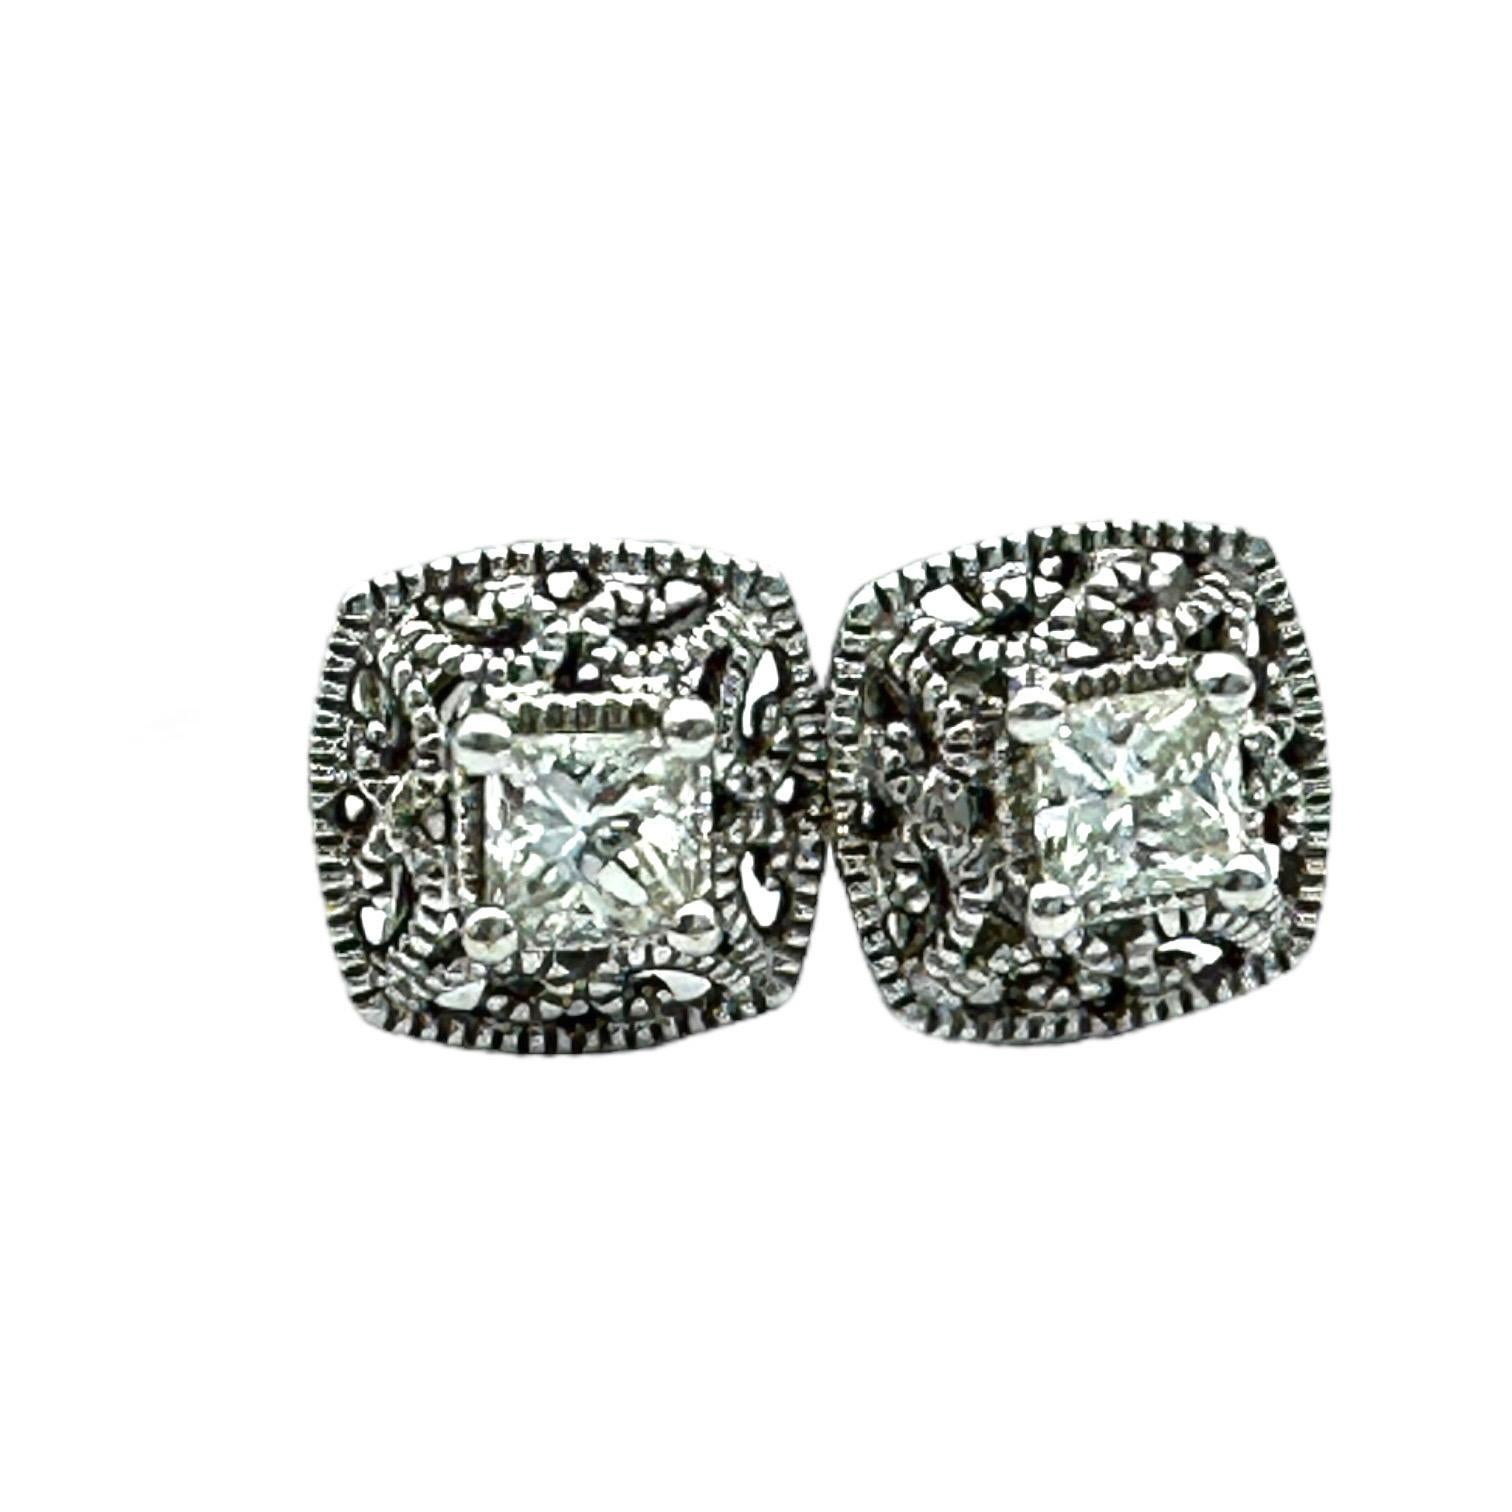 These stunning .35 Carat Princess Lacy Diamond Stud Earrings show your love for special people. These beautiful earrings feature premium lacy diamonds to give them a distinct look. Crafted with only the highest-quality diamonds, these earrings will